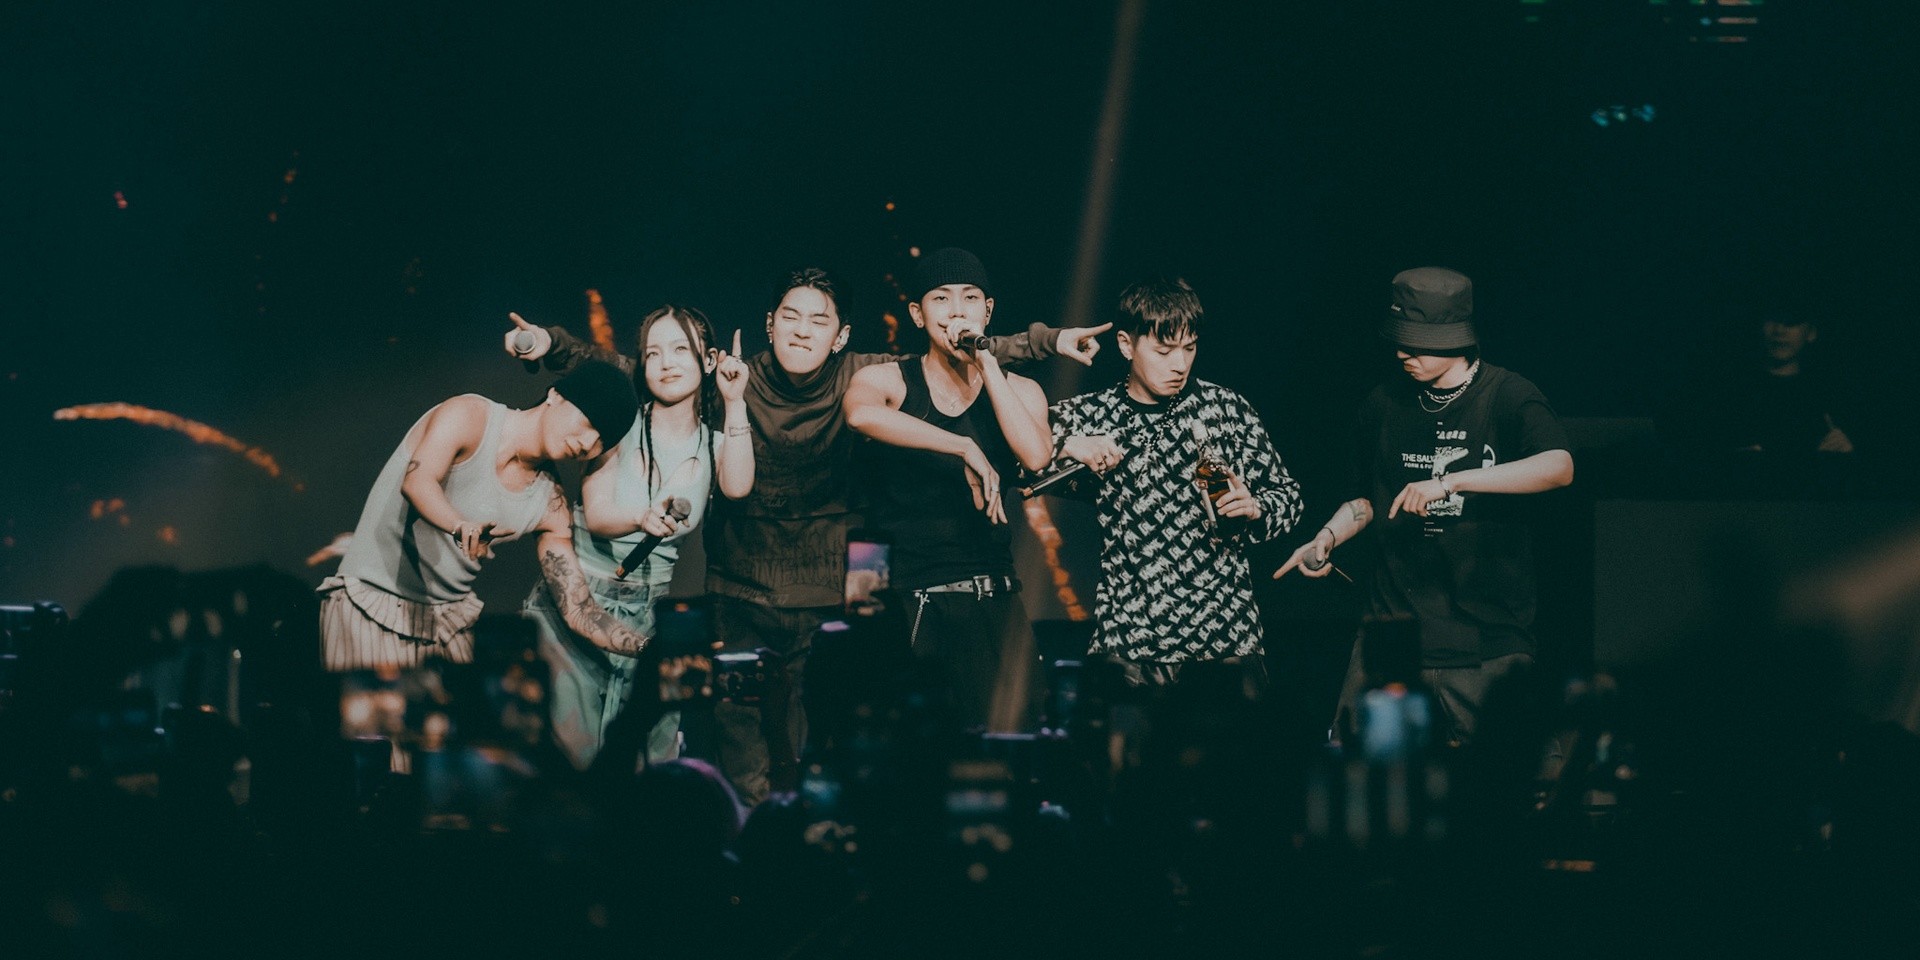 Simon Dominic, GRAY, LeeHi, YUGYEOM, and more go above and beyond at AOMG's 'FOLLOW THE MOVEMENT' Manila concert — gig report